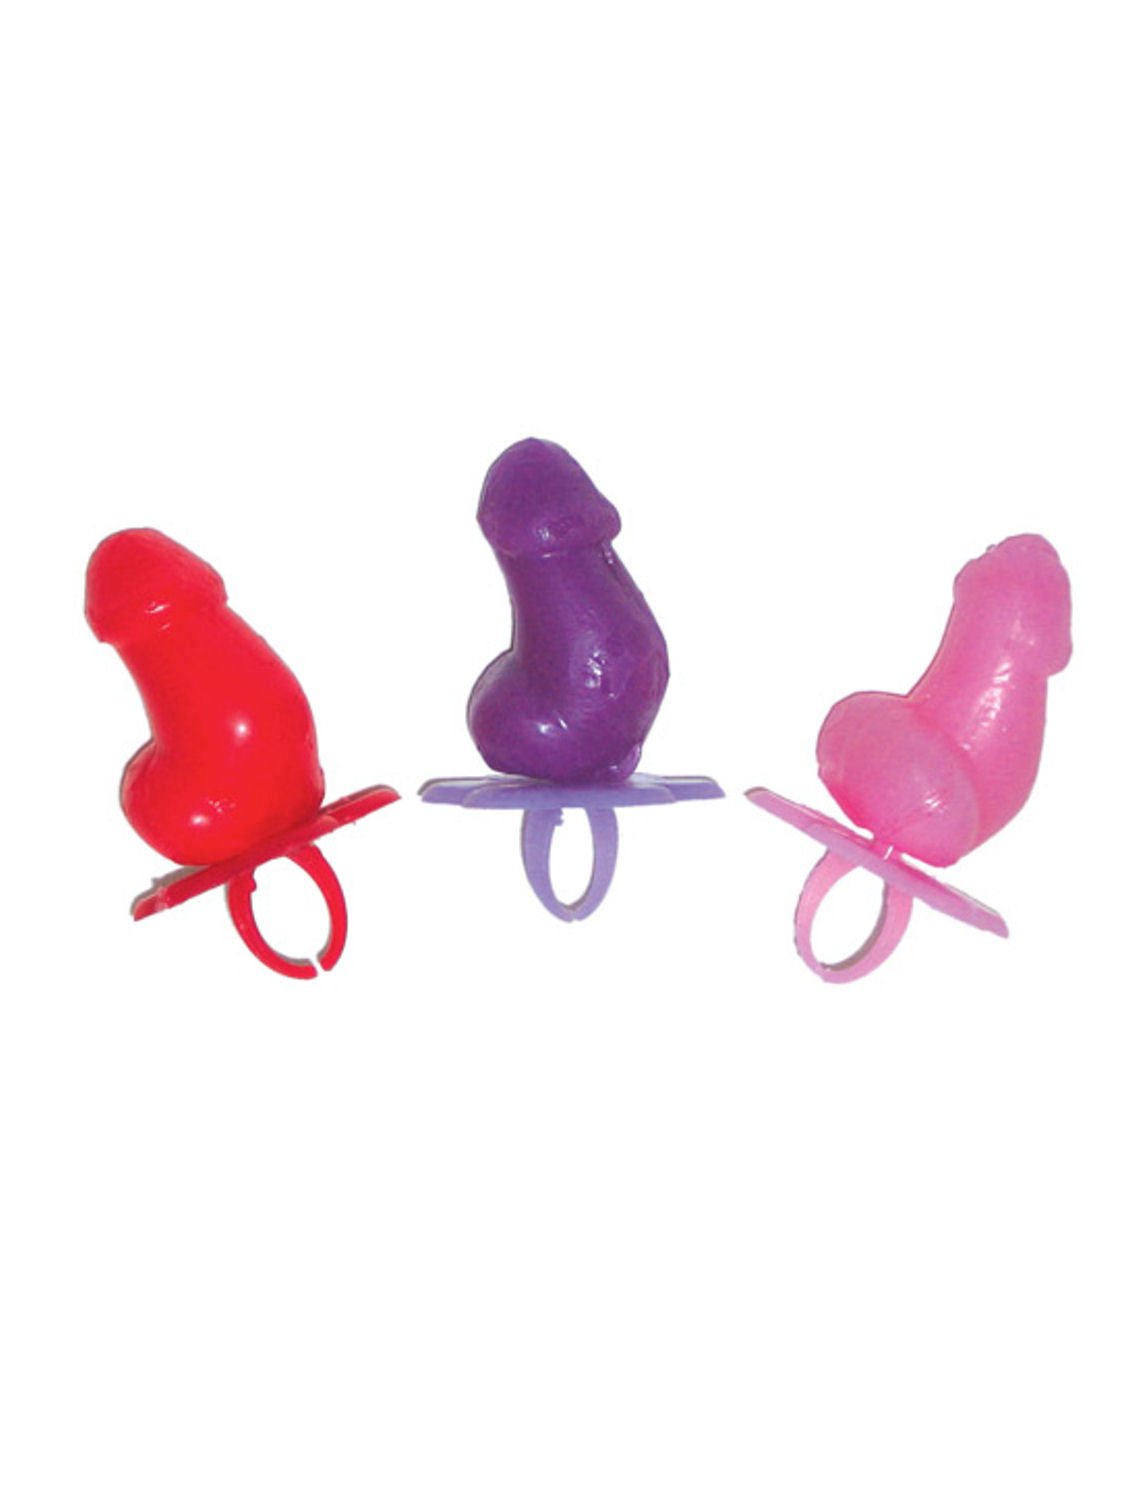 Penis Candy Ring — Lost Objects, Found Treasures pic